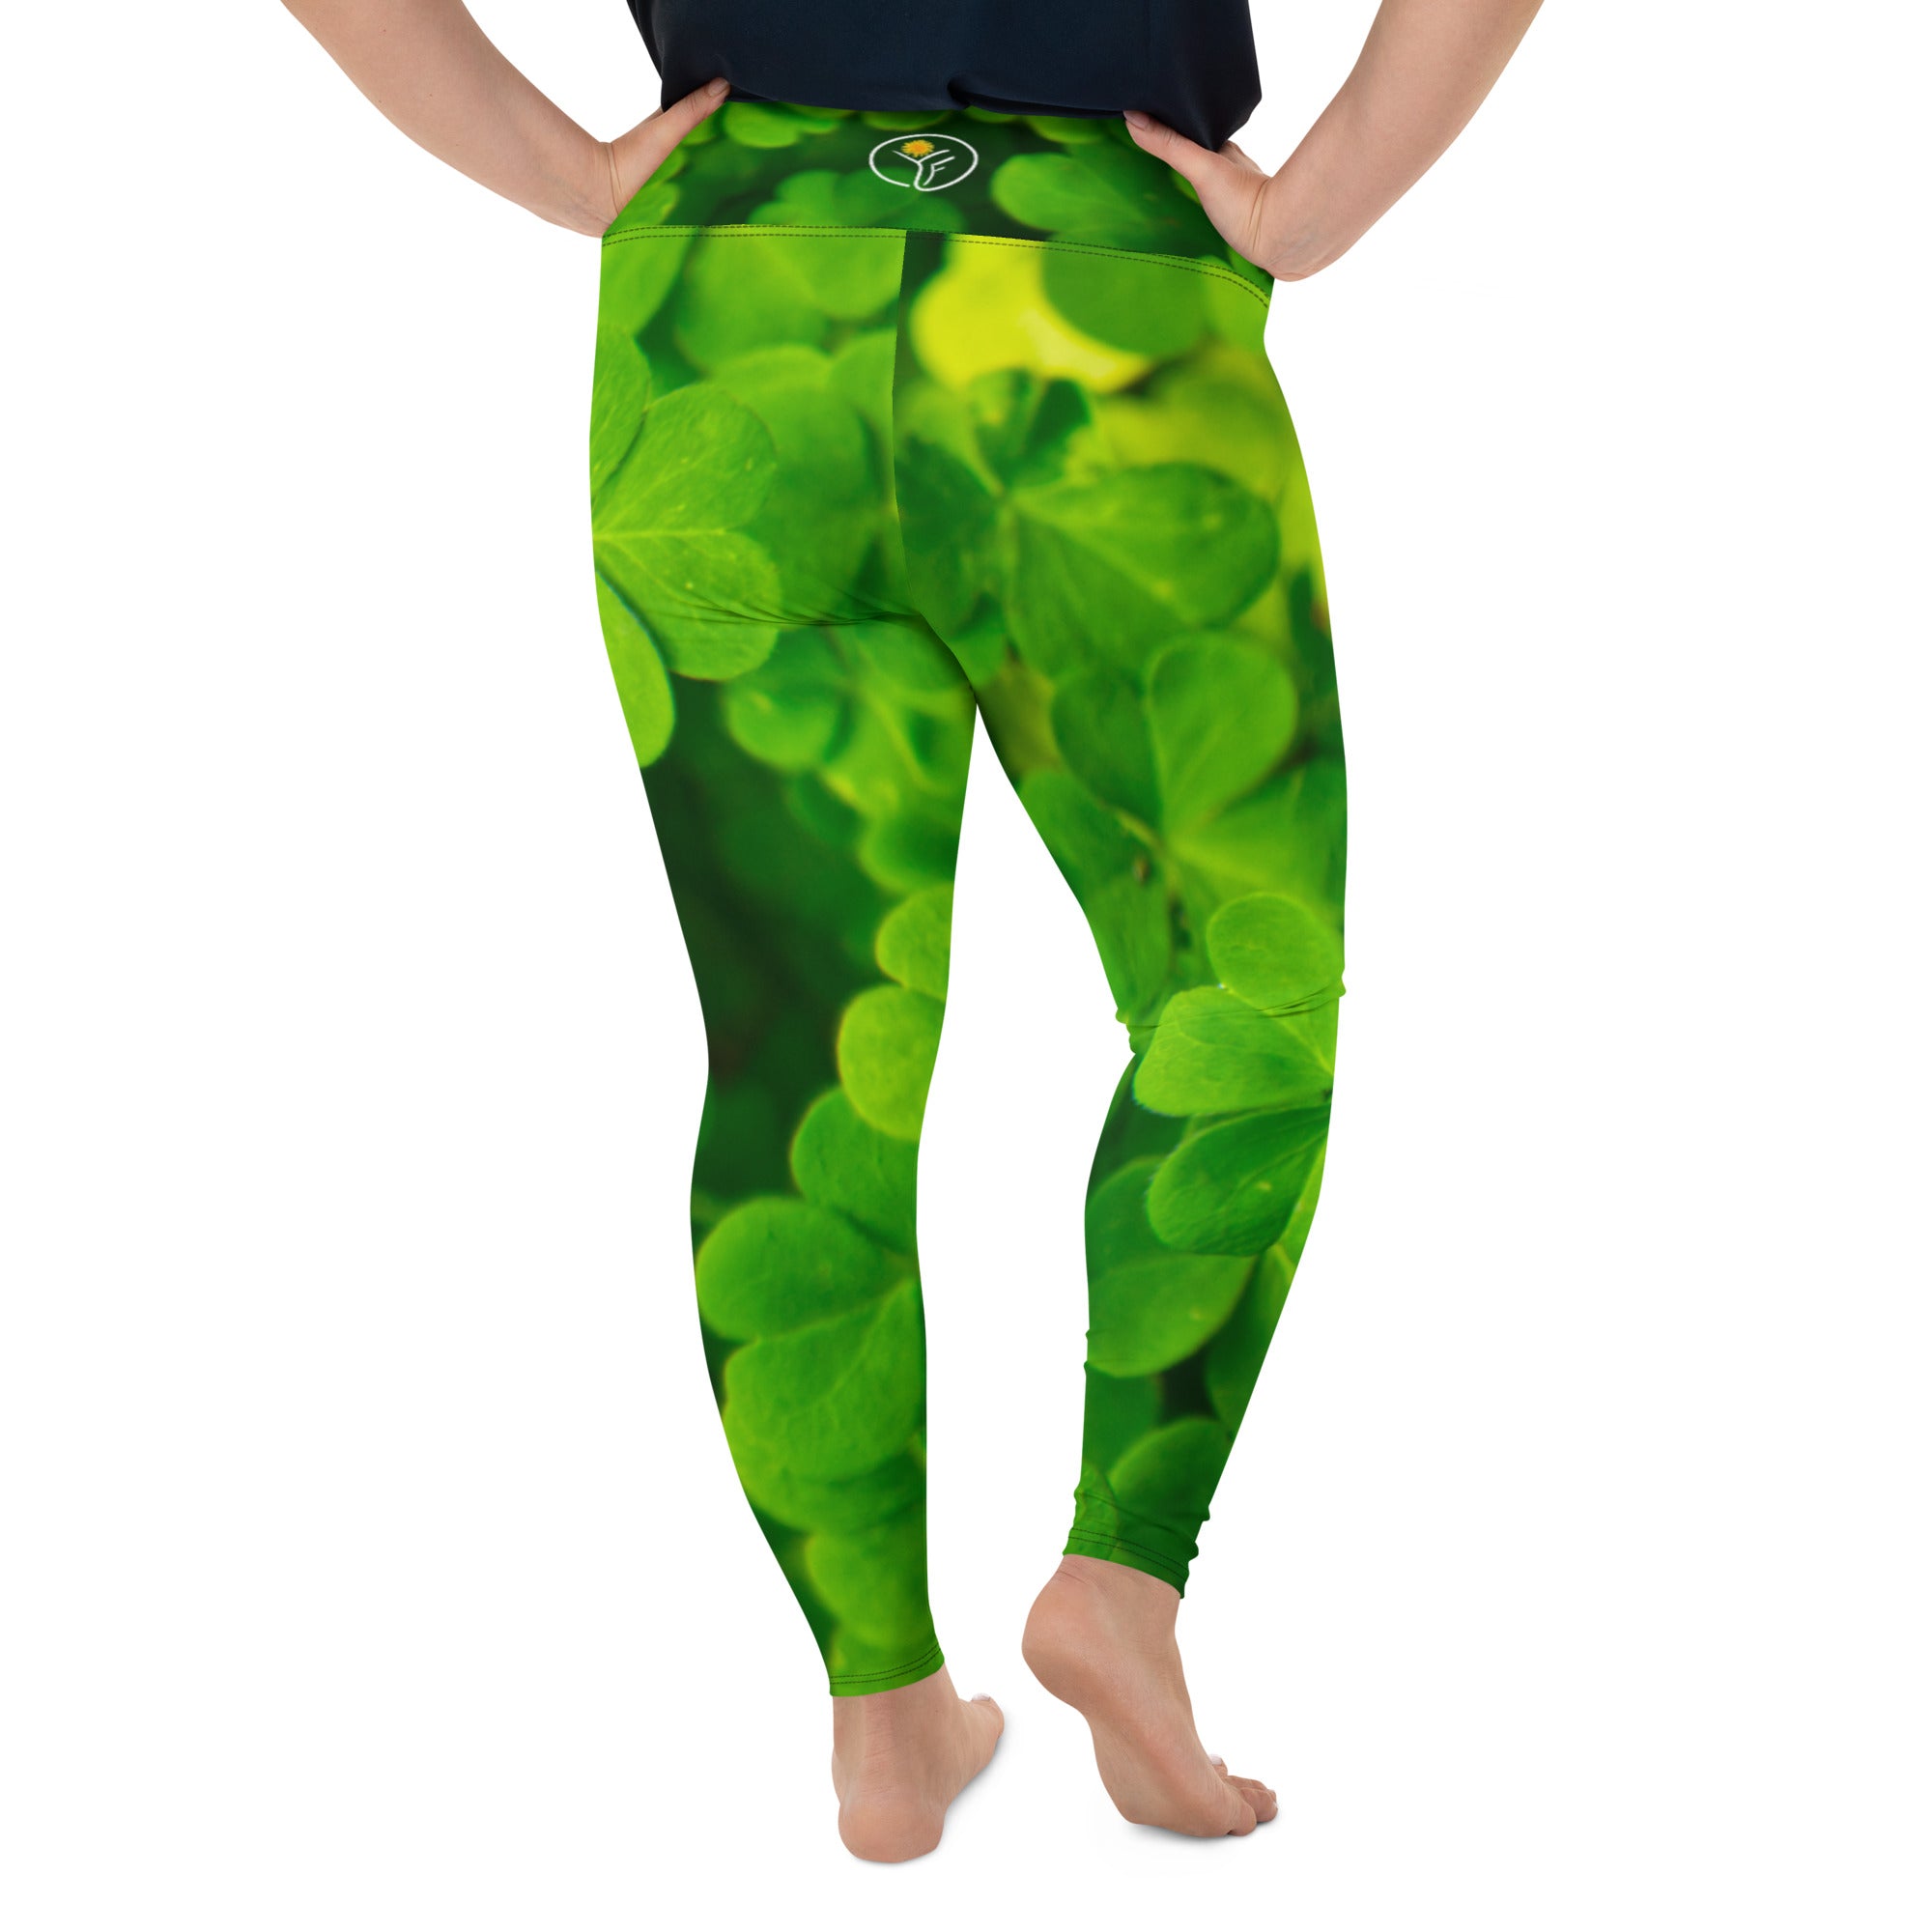 Lucky Leafy Plus Size Leggings – YoniFlower Collections